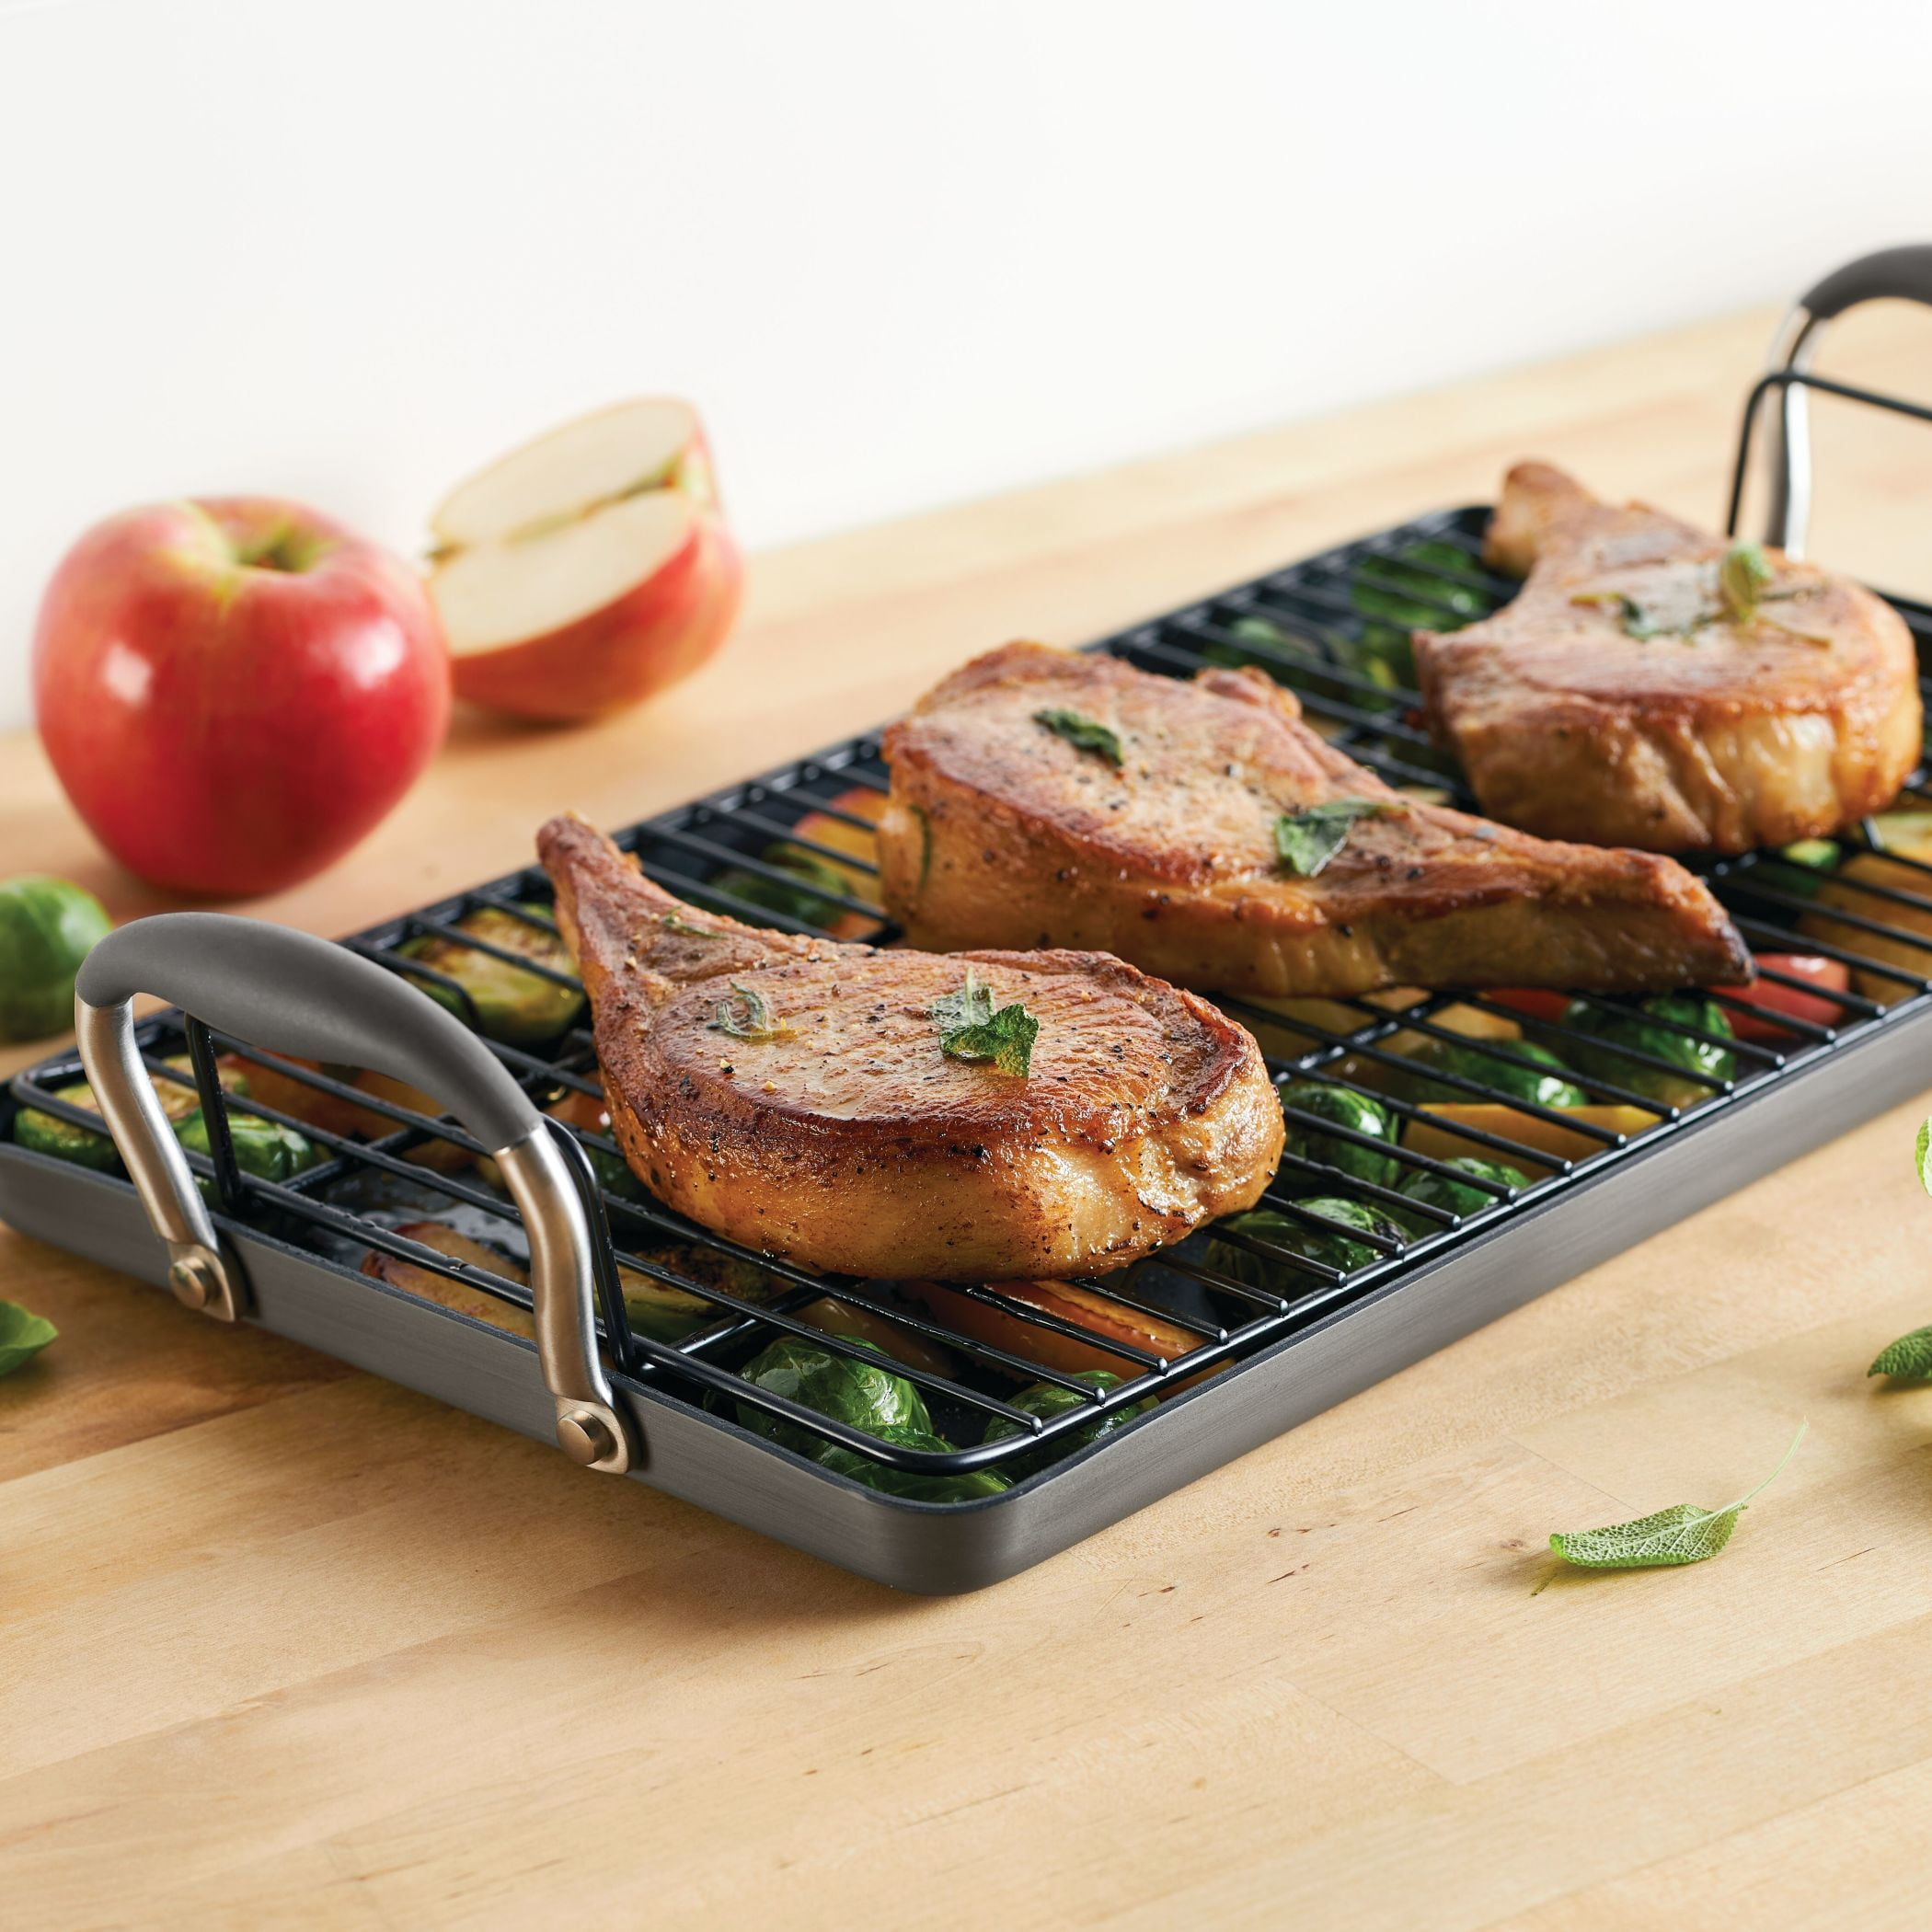 10 x 18 Double Burner Griddle with Multi-Purpose Rack – Anolon